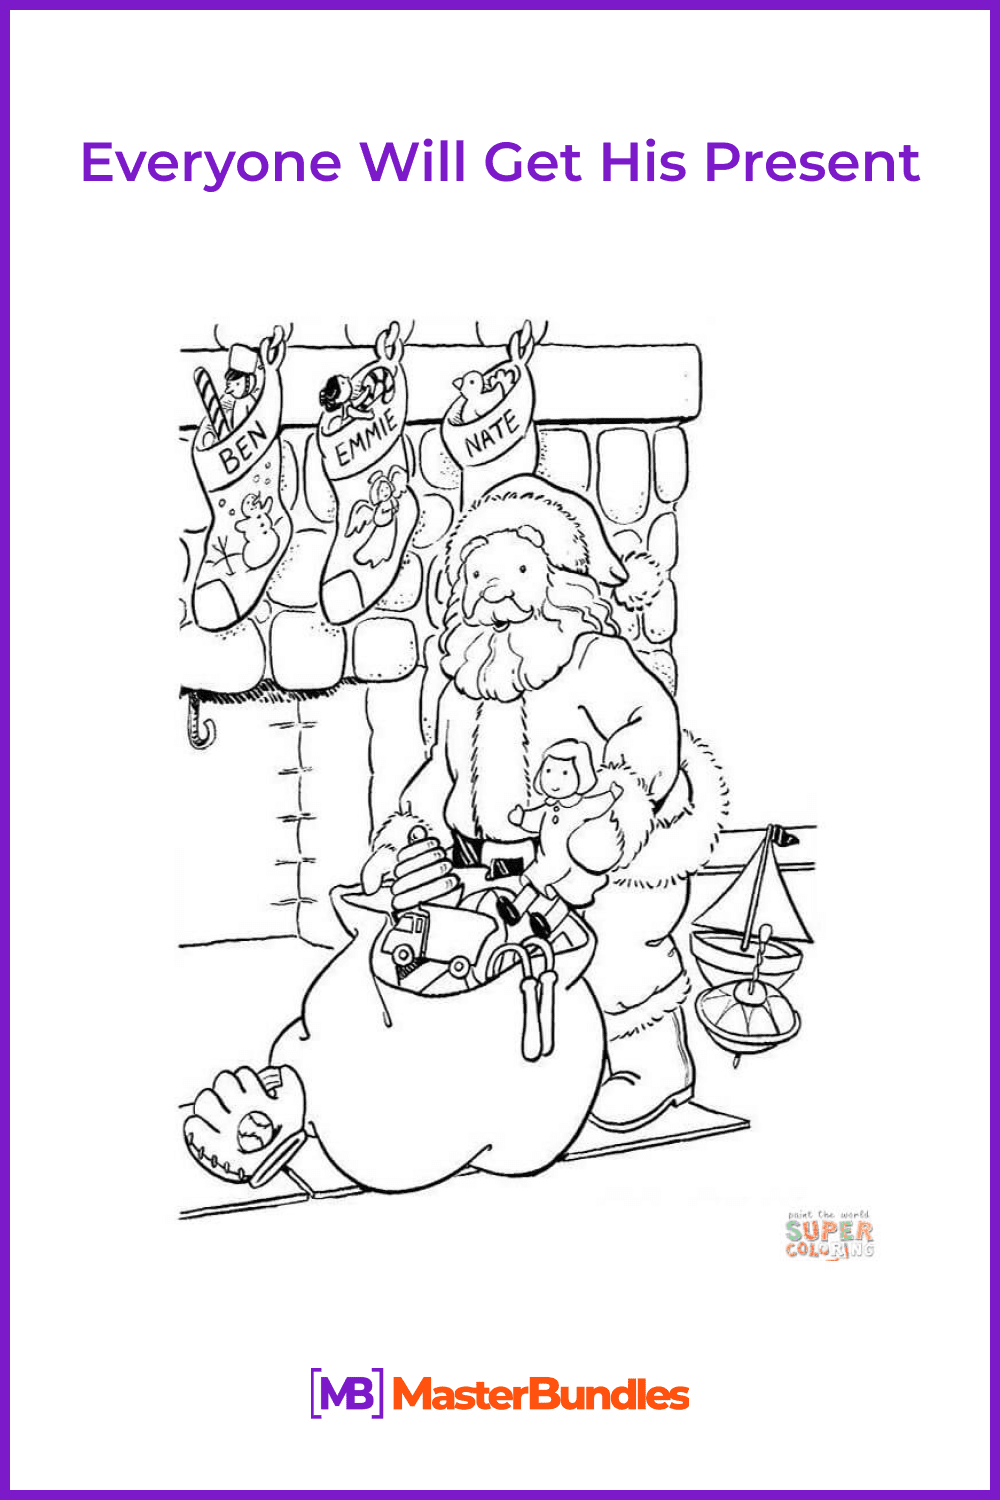 Everyone Will Get His Present coloring page pinterest image.